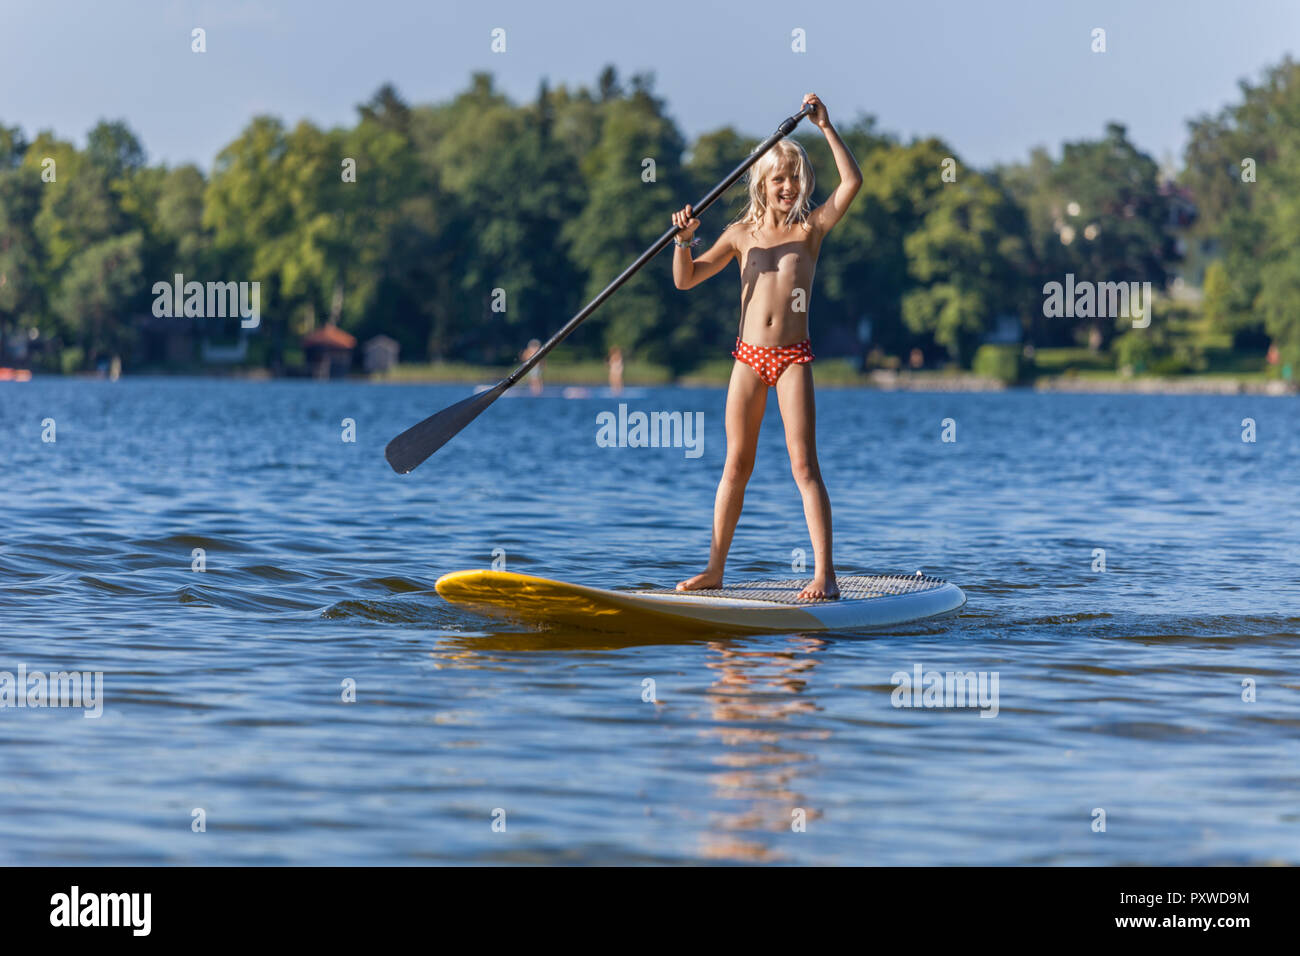 Ragazza giovane stand up paddle surf Foto Stock